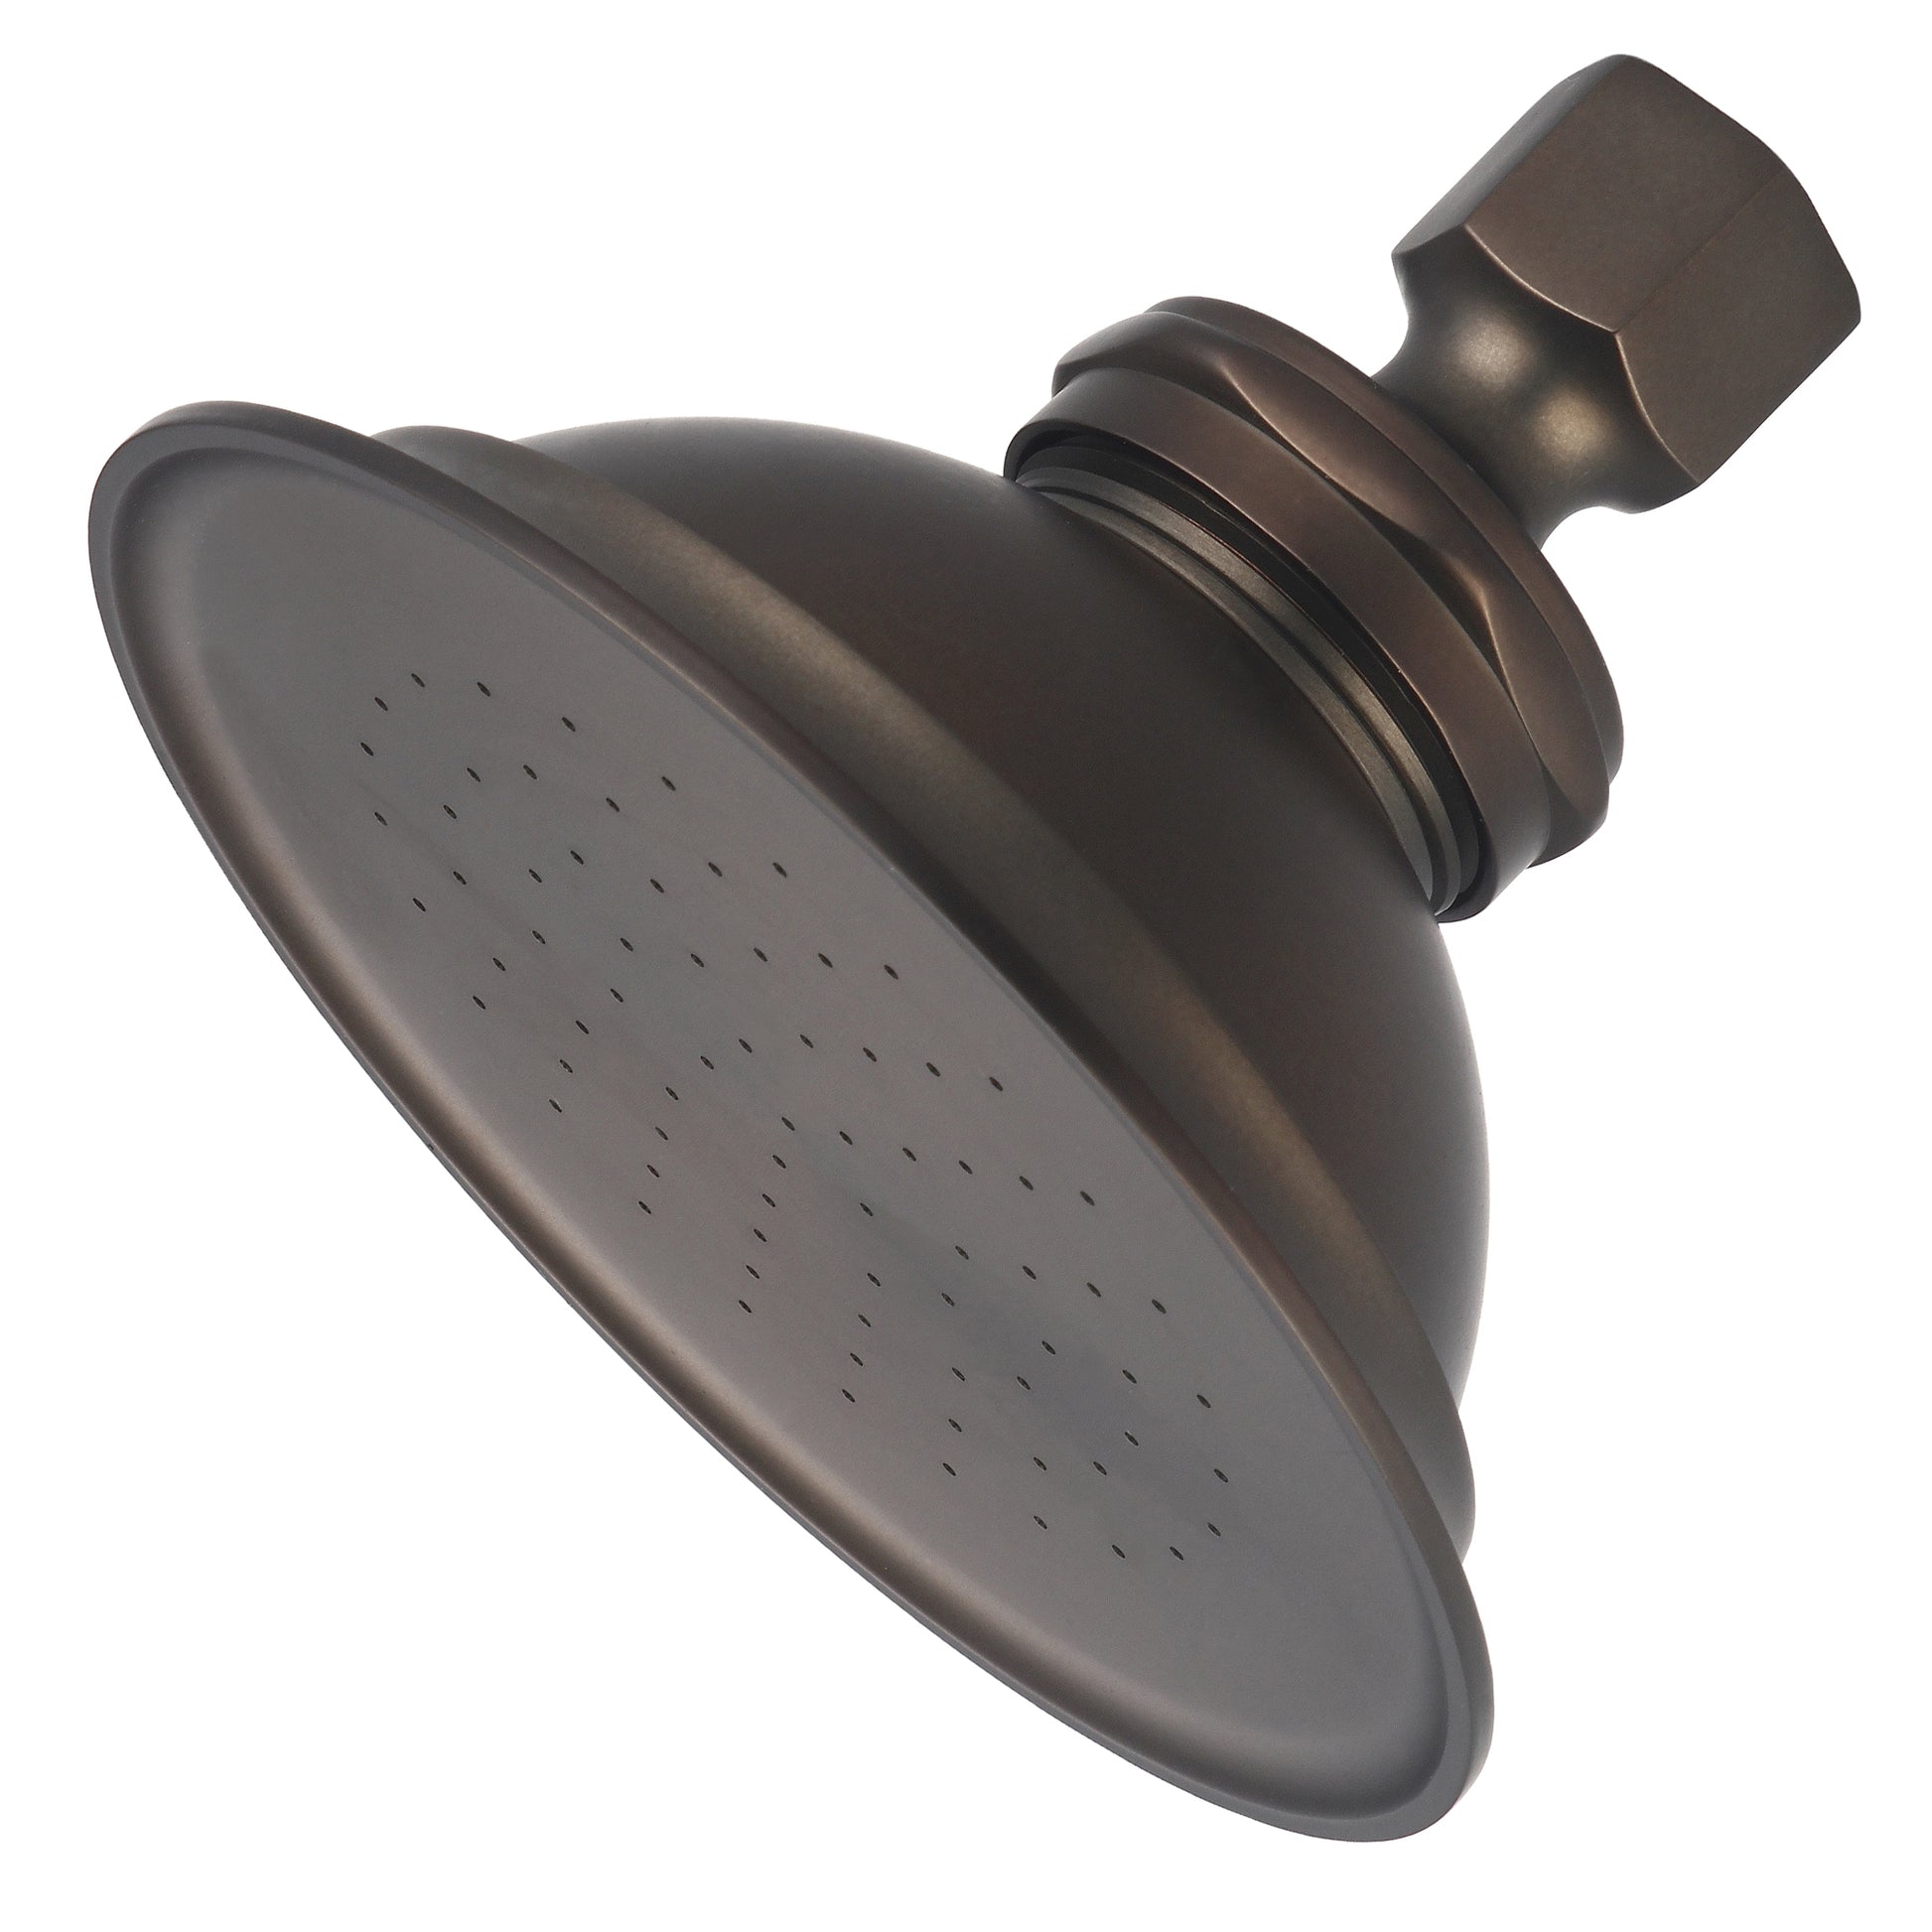 Luxurious Spray Full Pan Shower Head in Oil Rubbed Bronze Finish